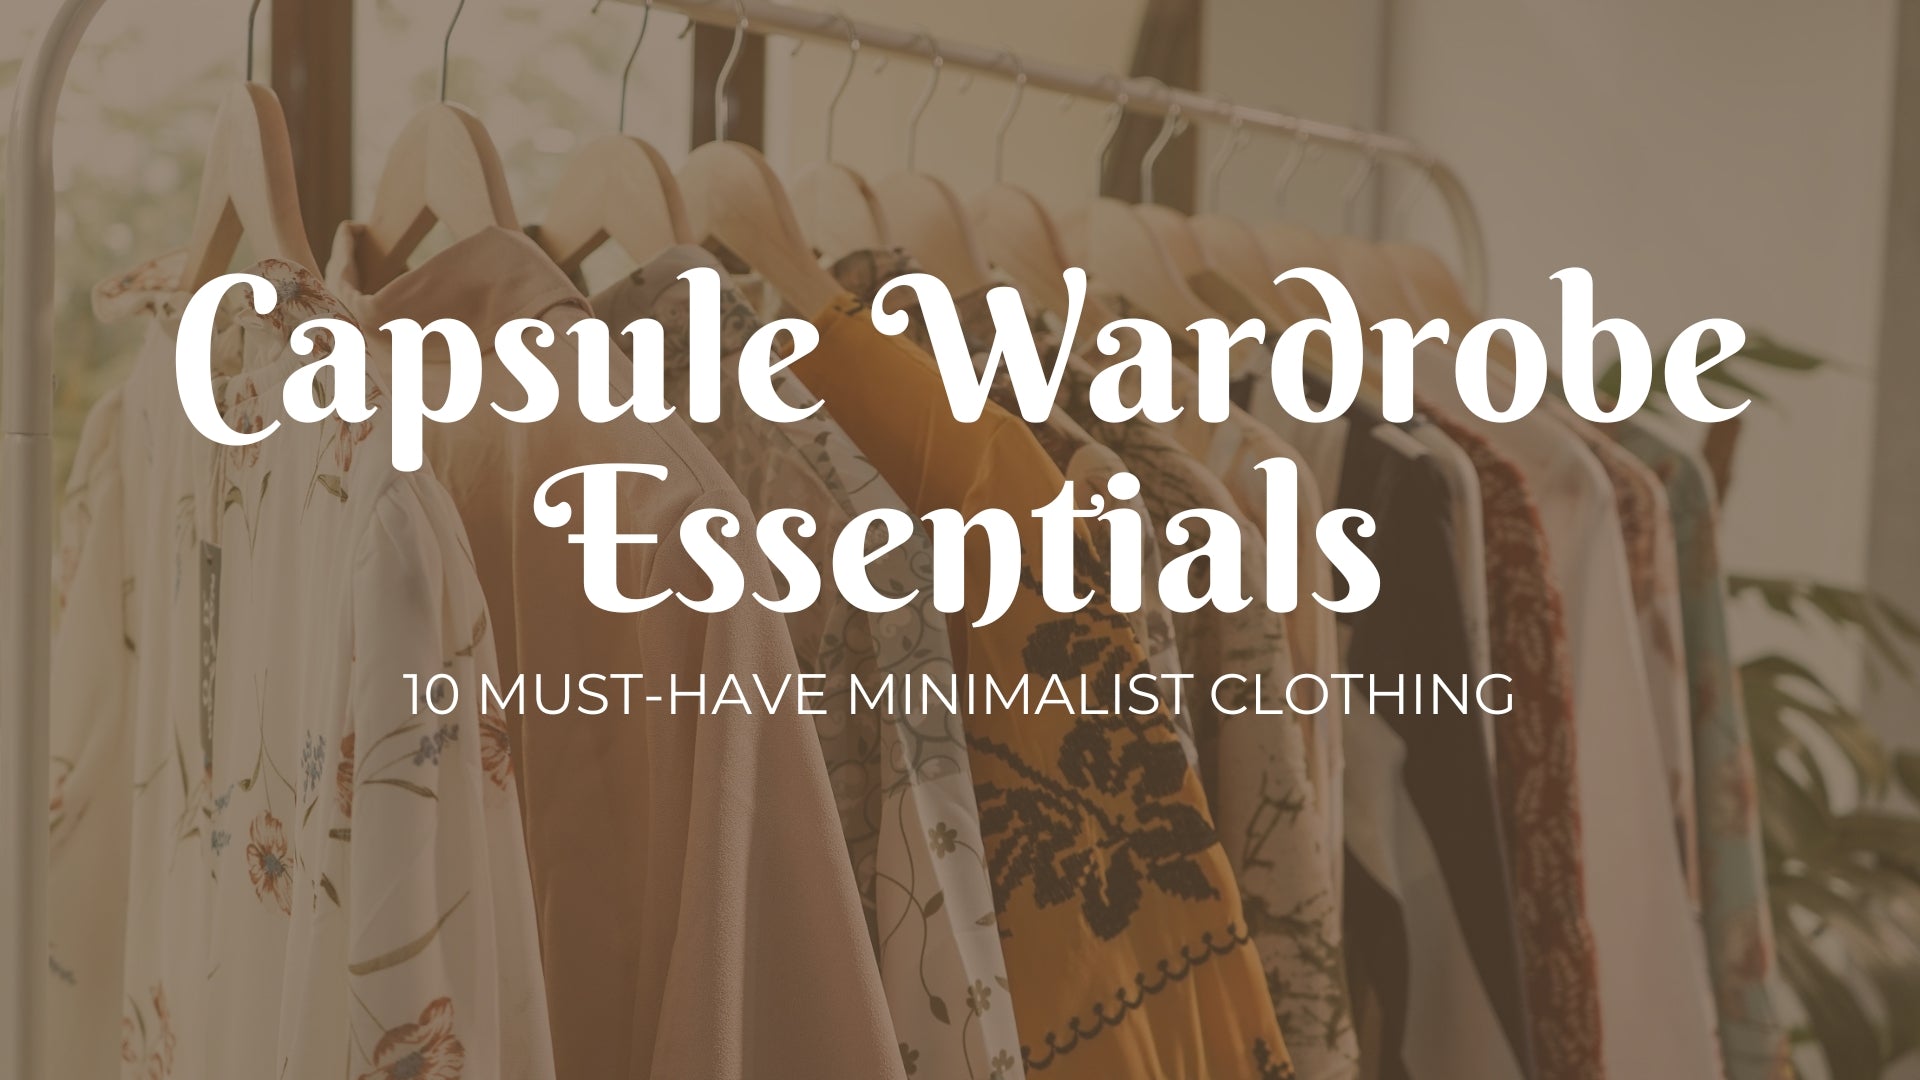 Base Outfit Essentials That Will Simplify Your Closet And Get You